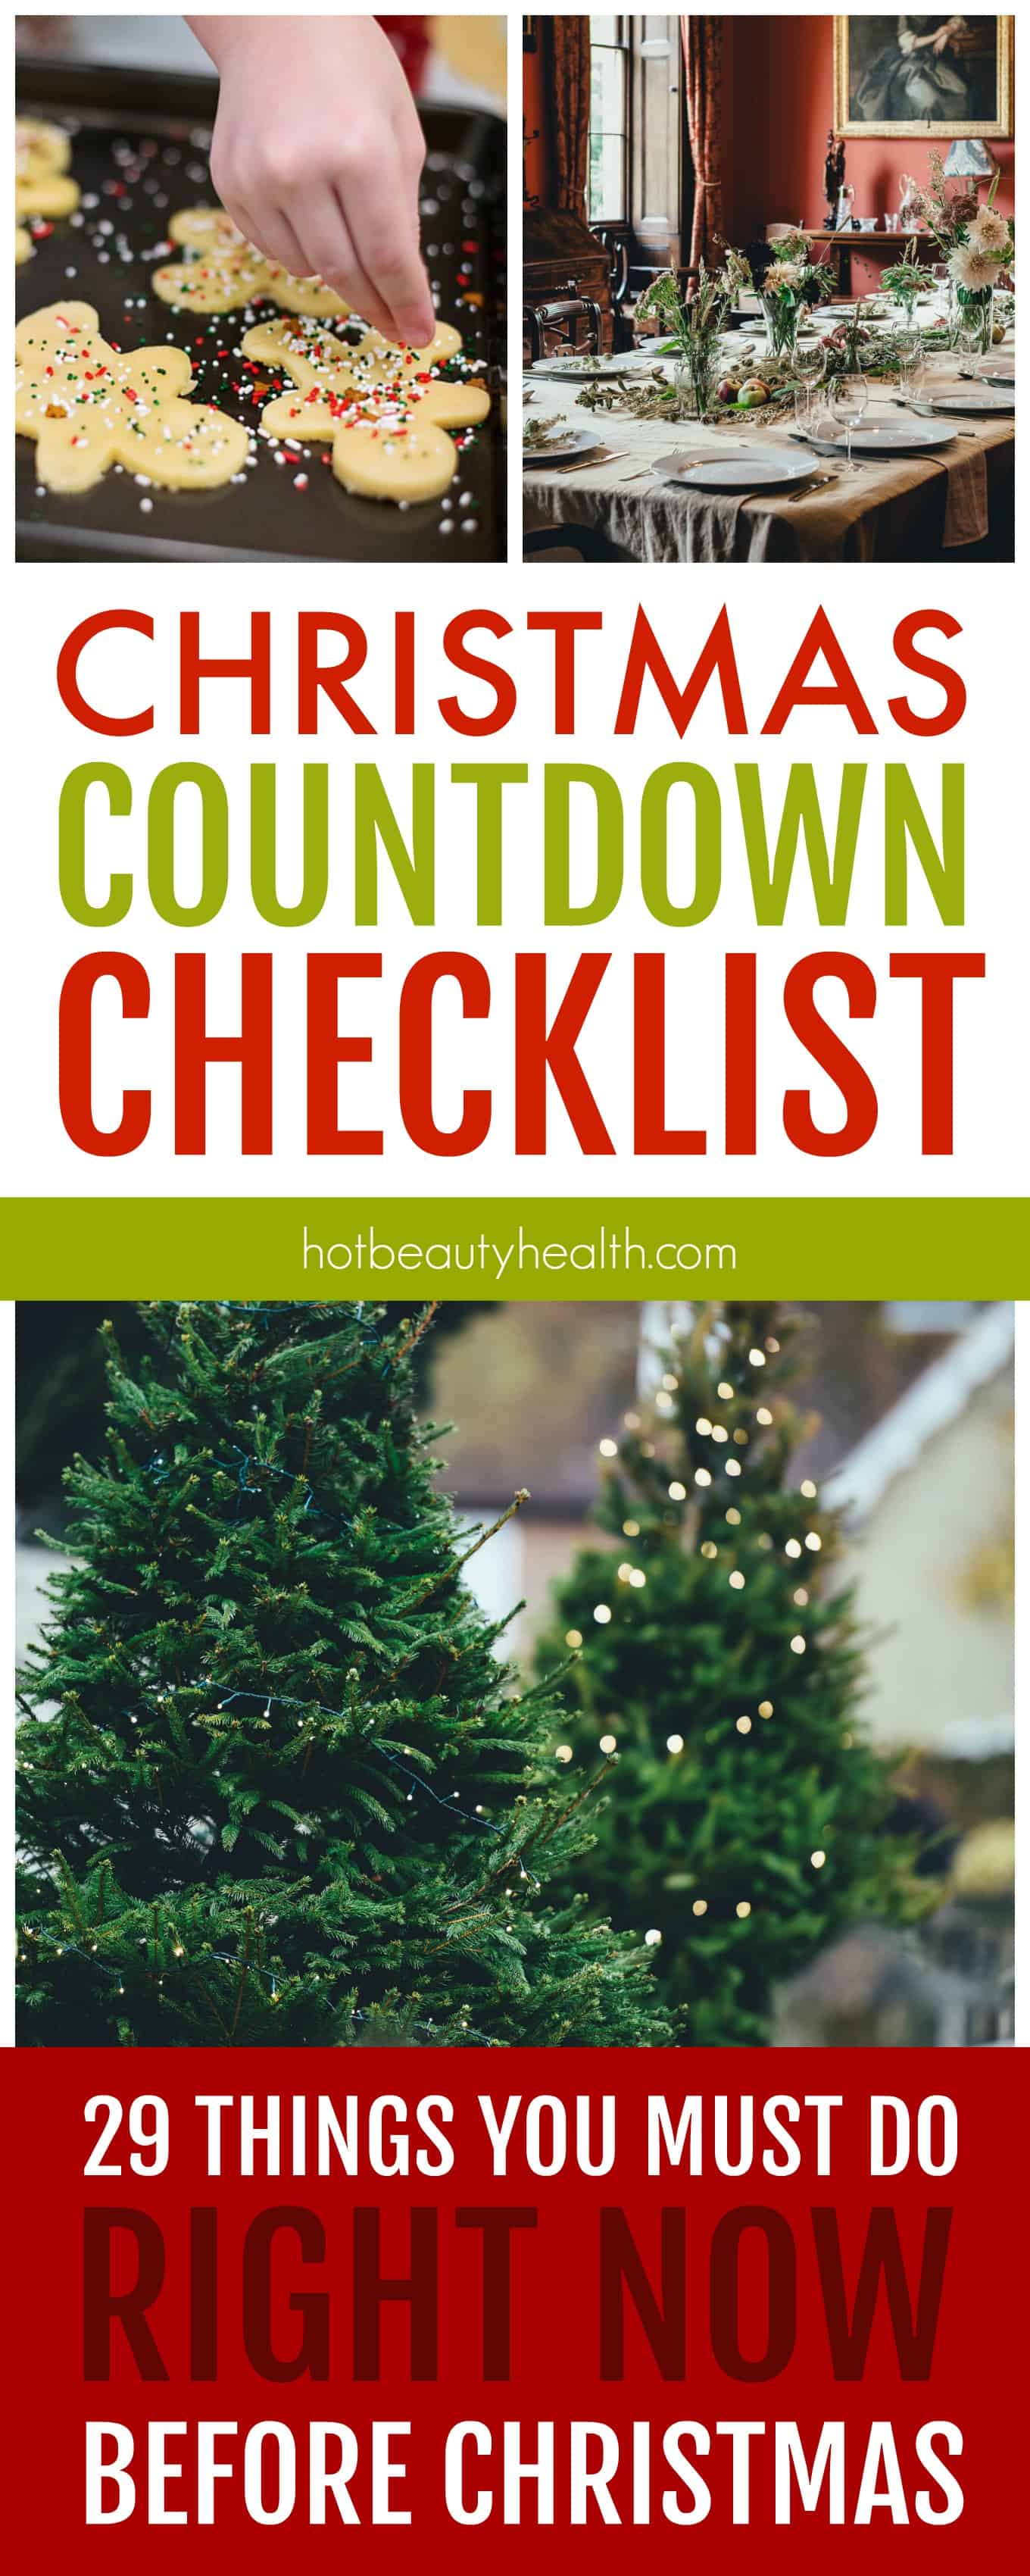 The Ultimate Christmas Countdown Checklist - Hot Beauty Health